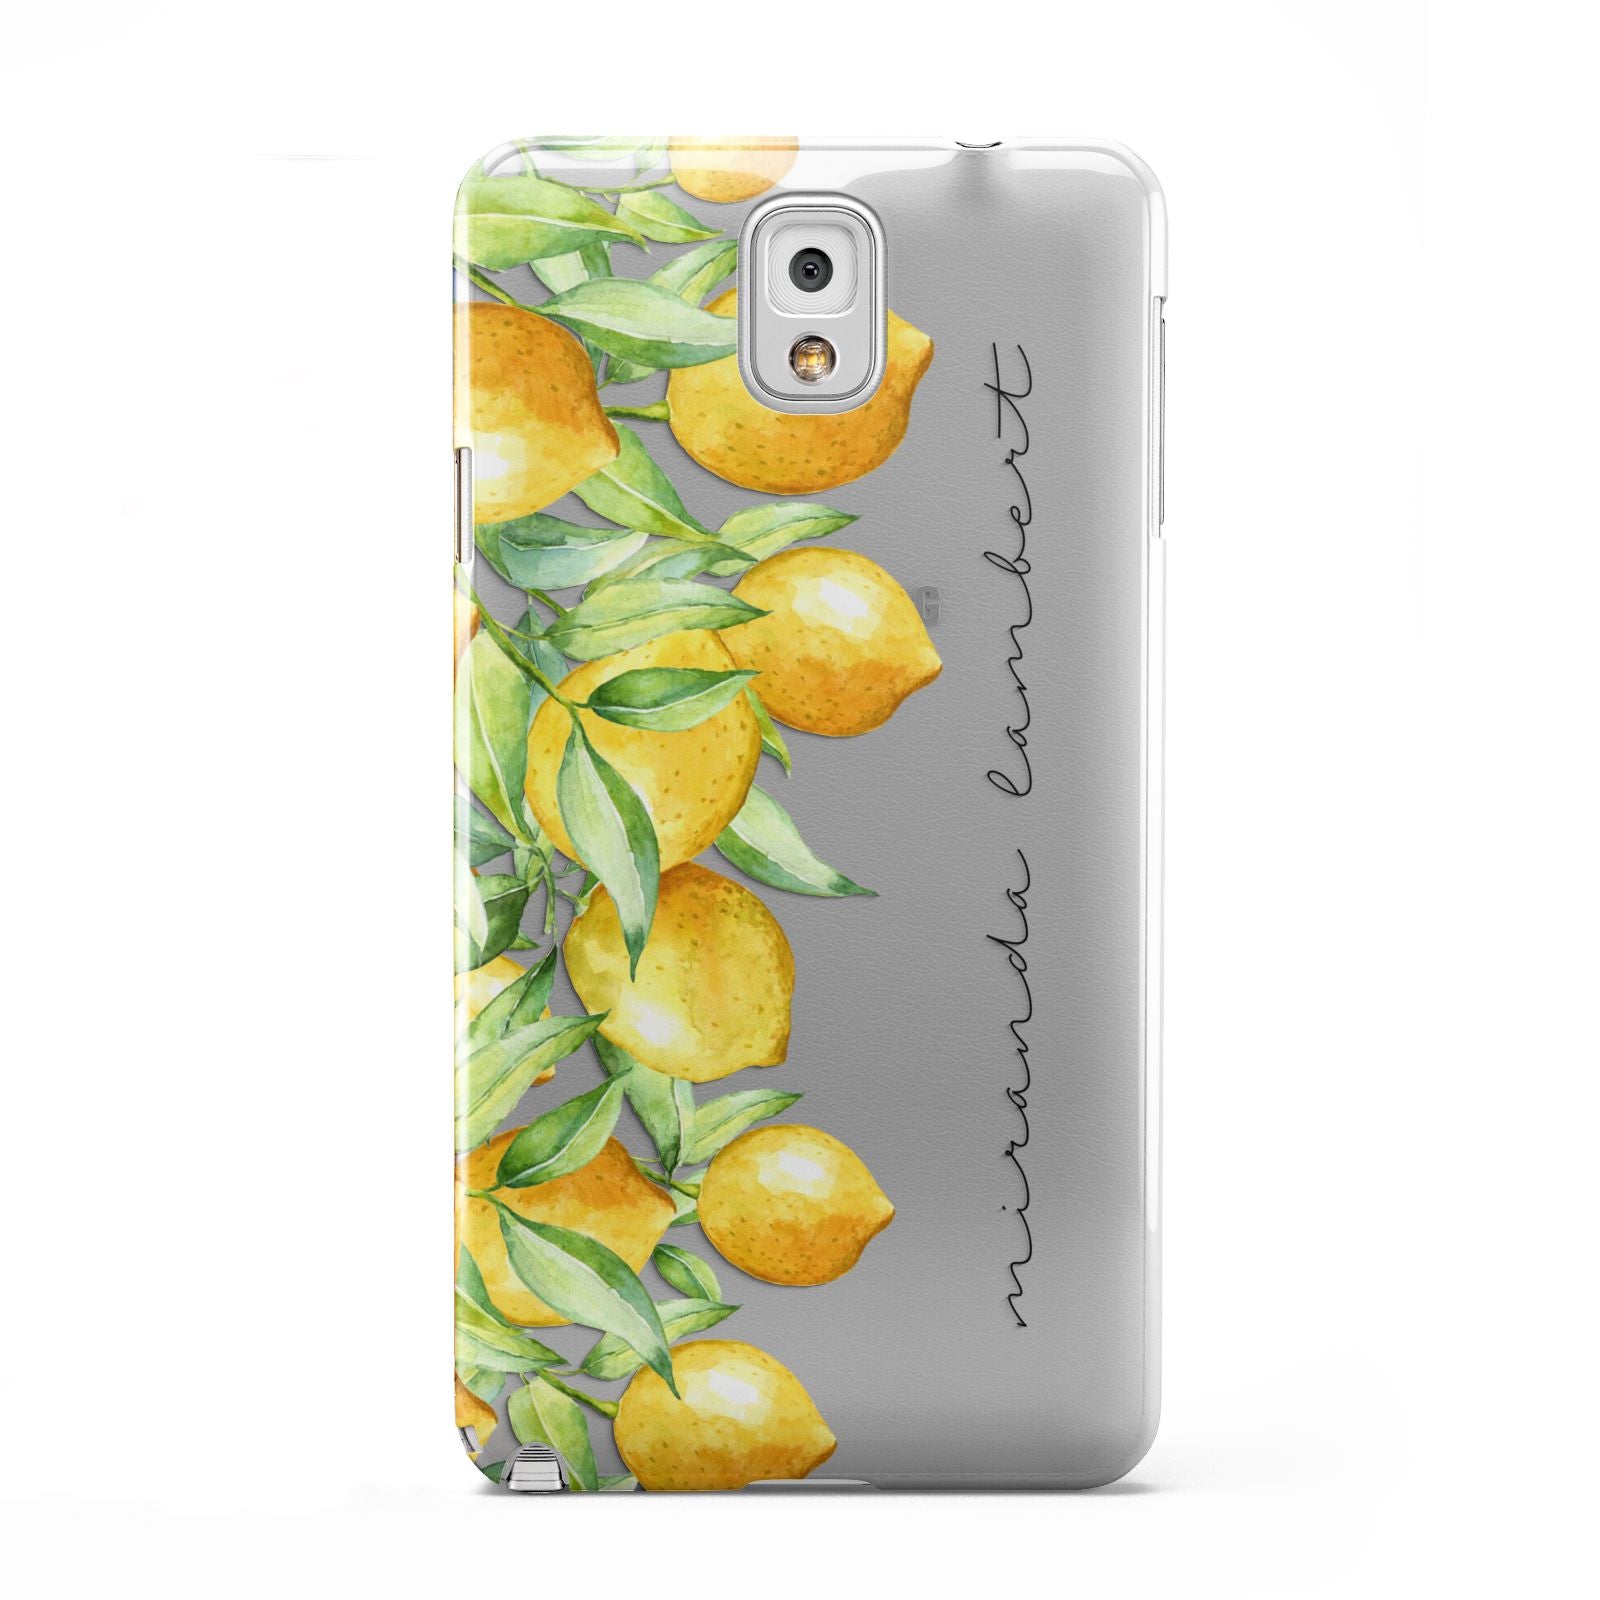 Personalised Lemon Bunches Samsung Galaxy Note 3 Case